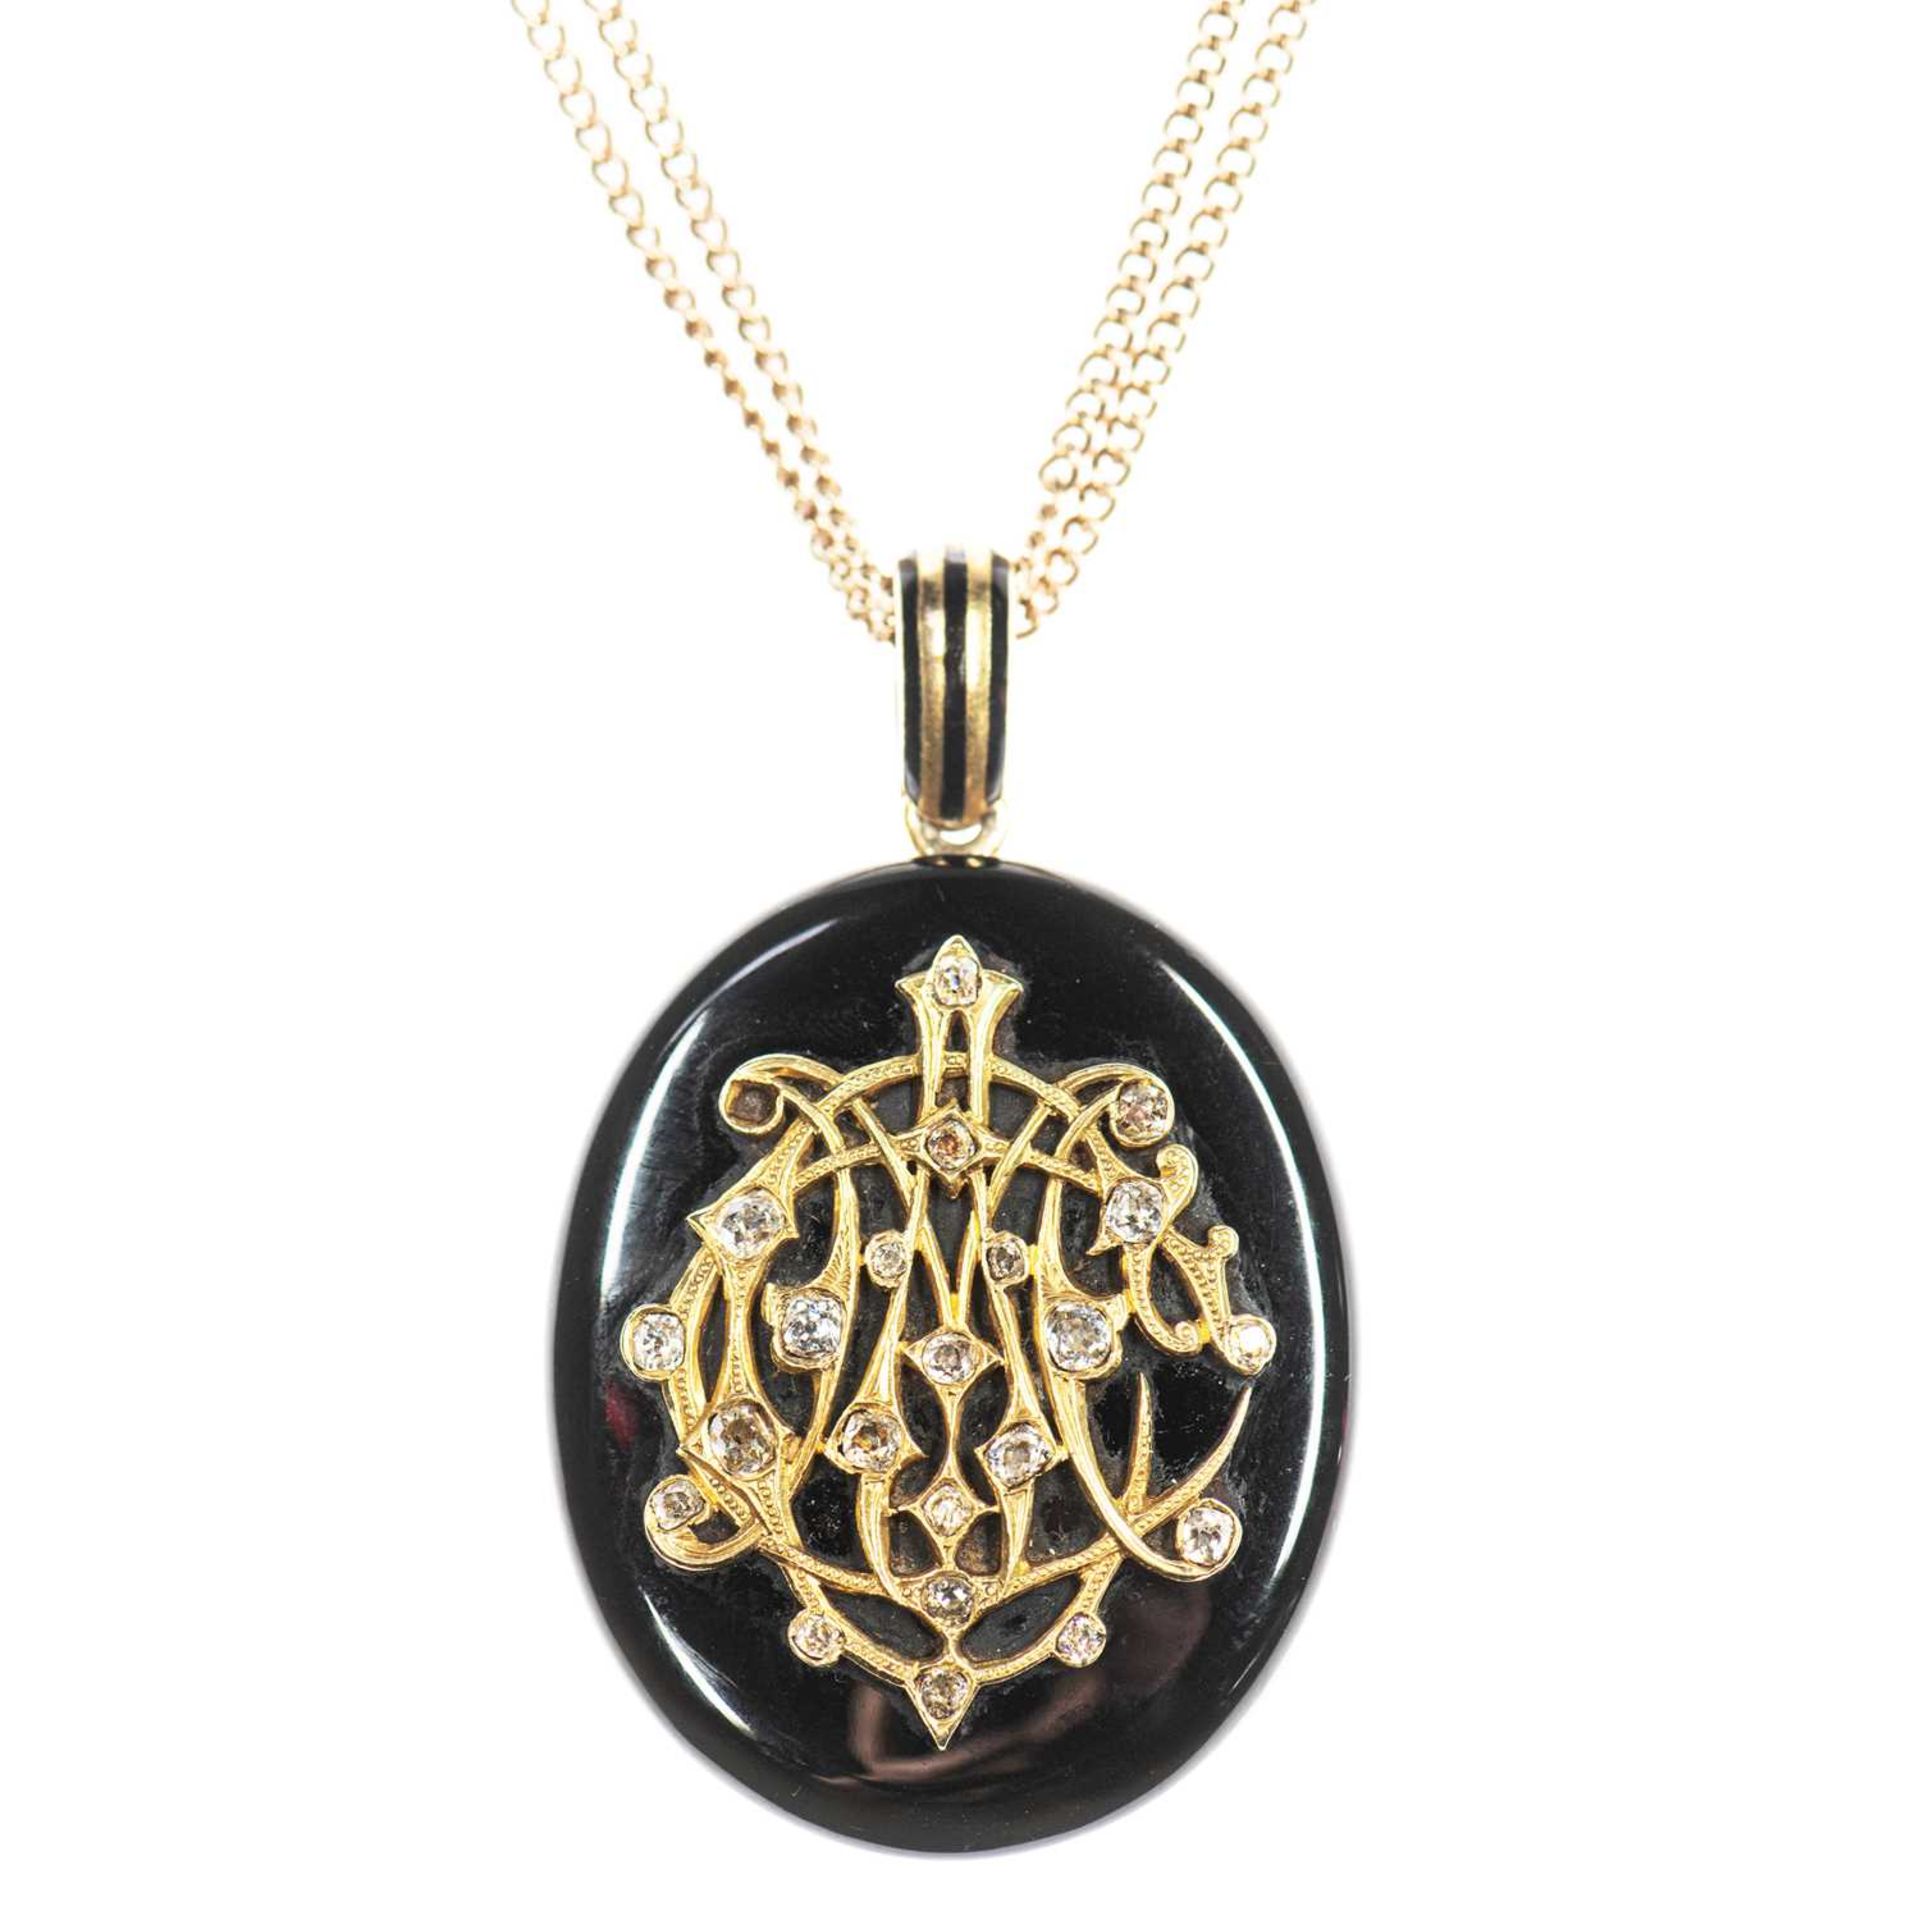 A VICTORIAN ONYX AND DIAMOND MOURNING LOCKET PENDANT ON CHAIN